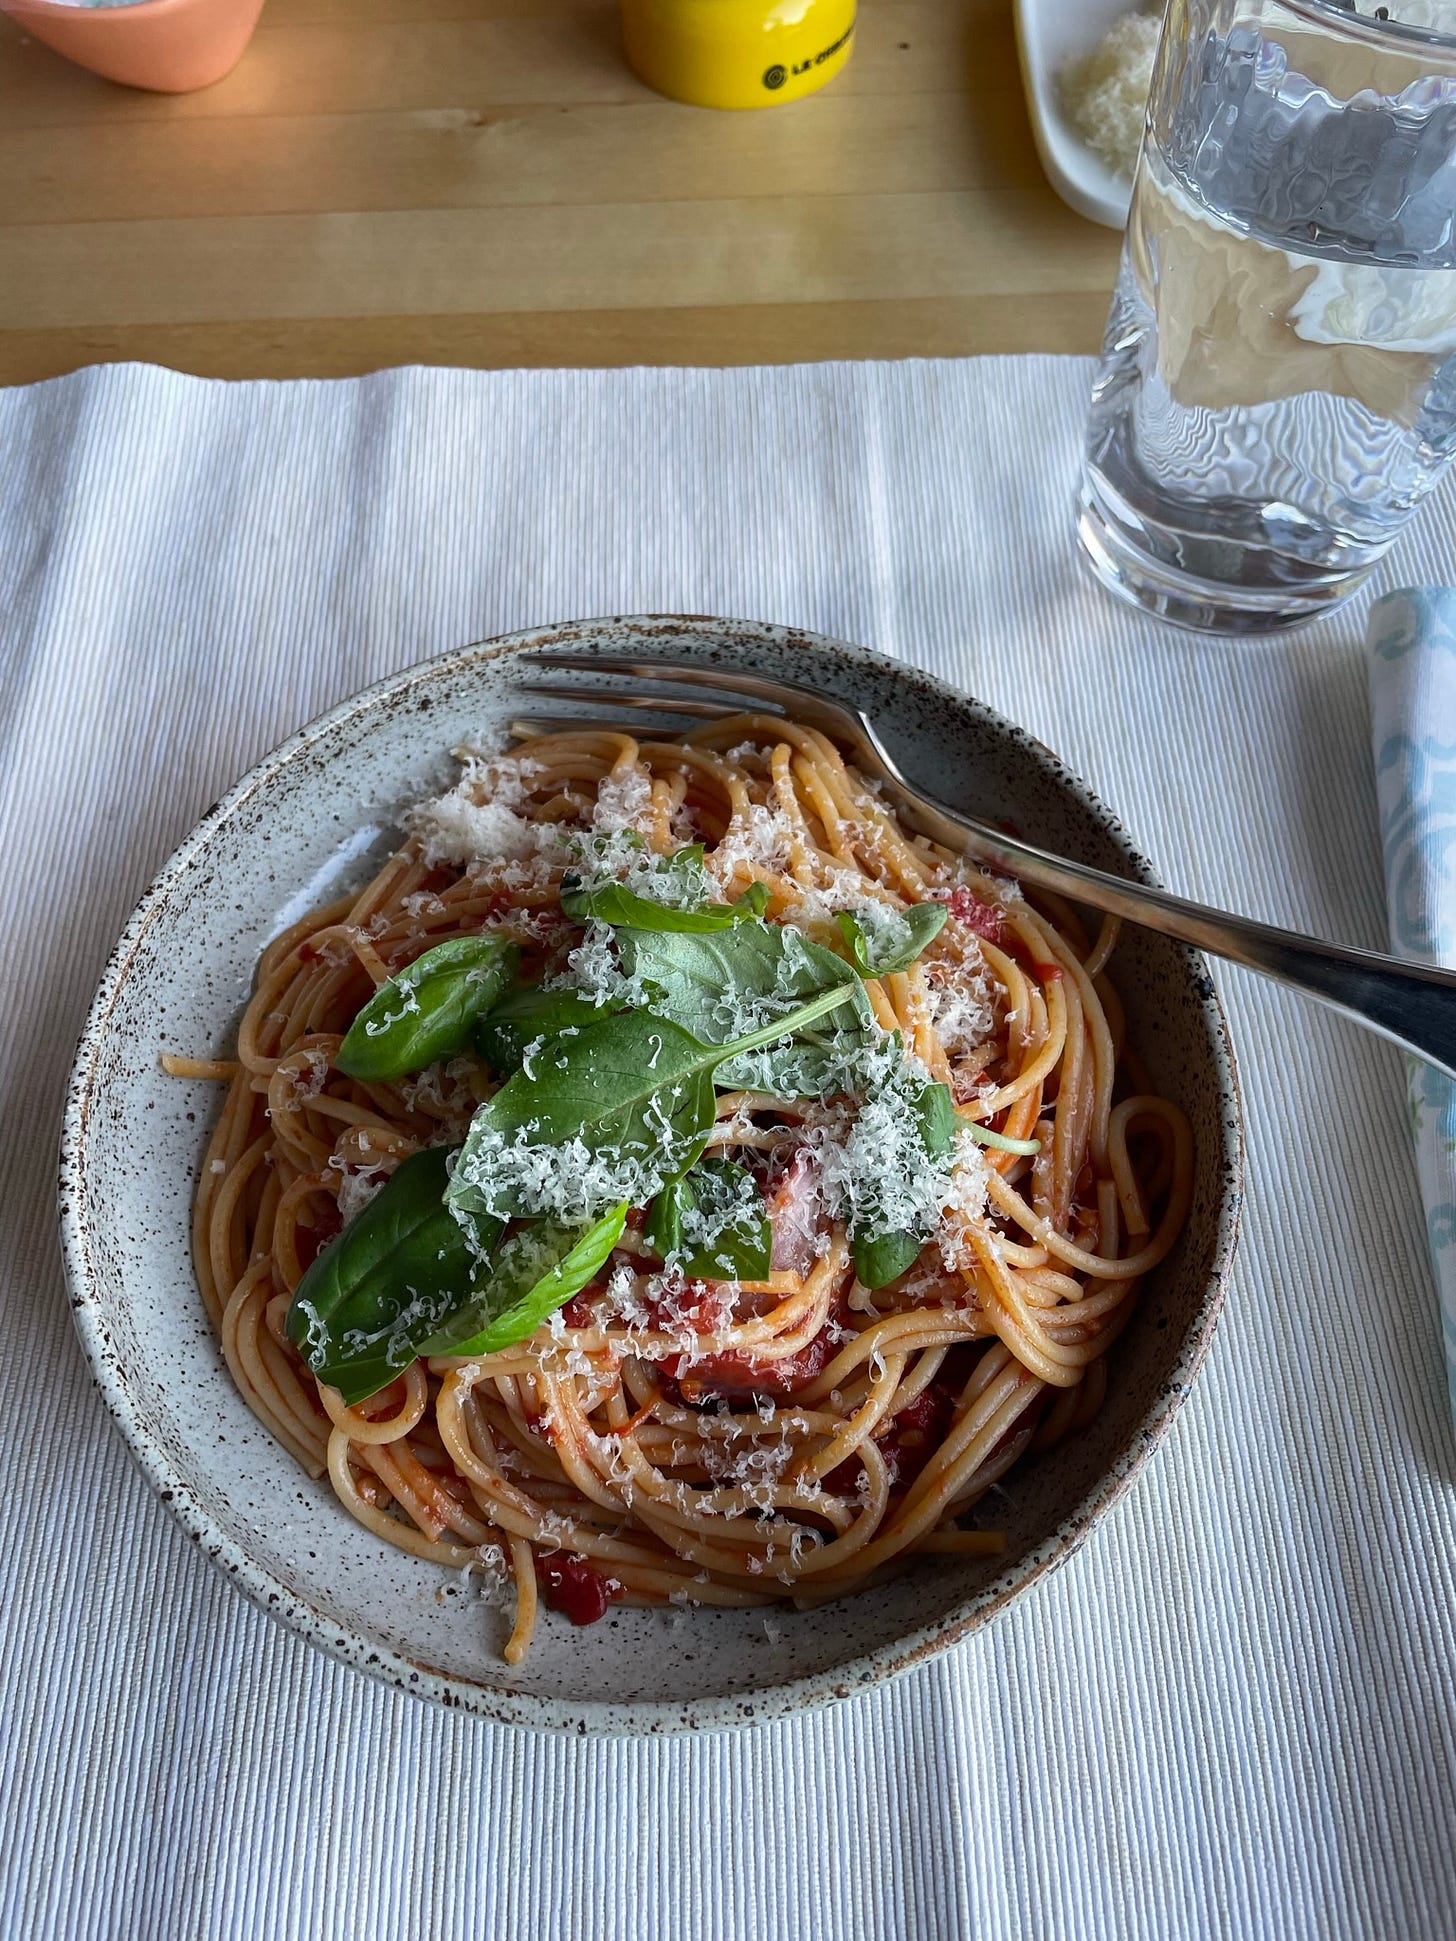 Grey speckled bowl of tomato pasta topped with grated Parmesan cheese and fresh basil leaves. On the dining table is a glass of water, cream placemat, napkin, salt and pepper.